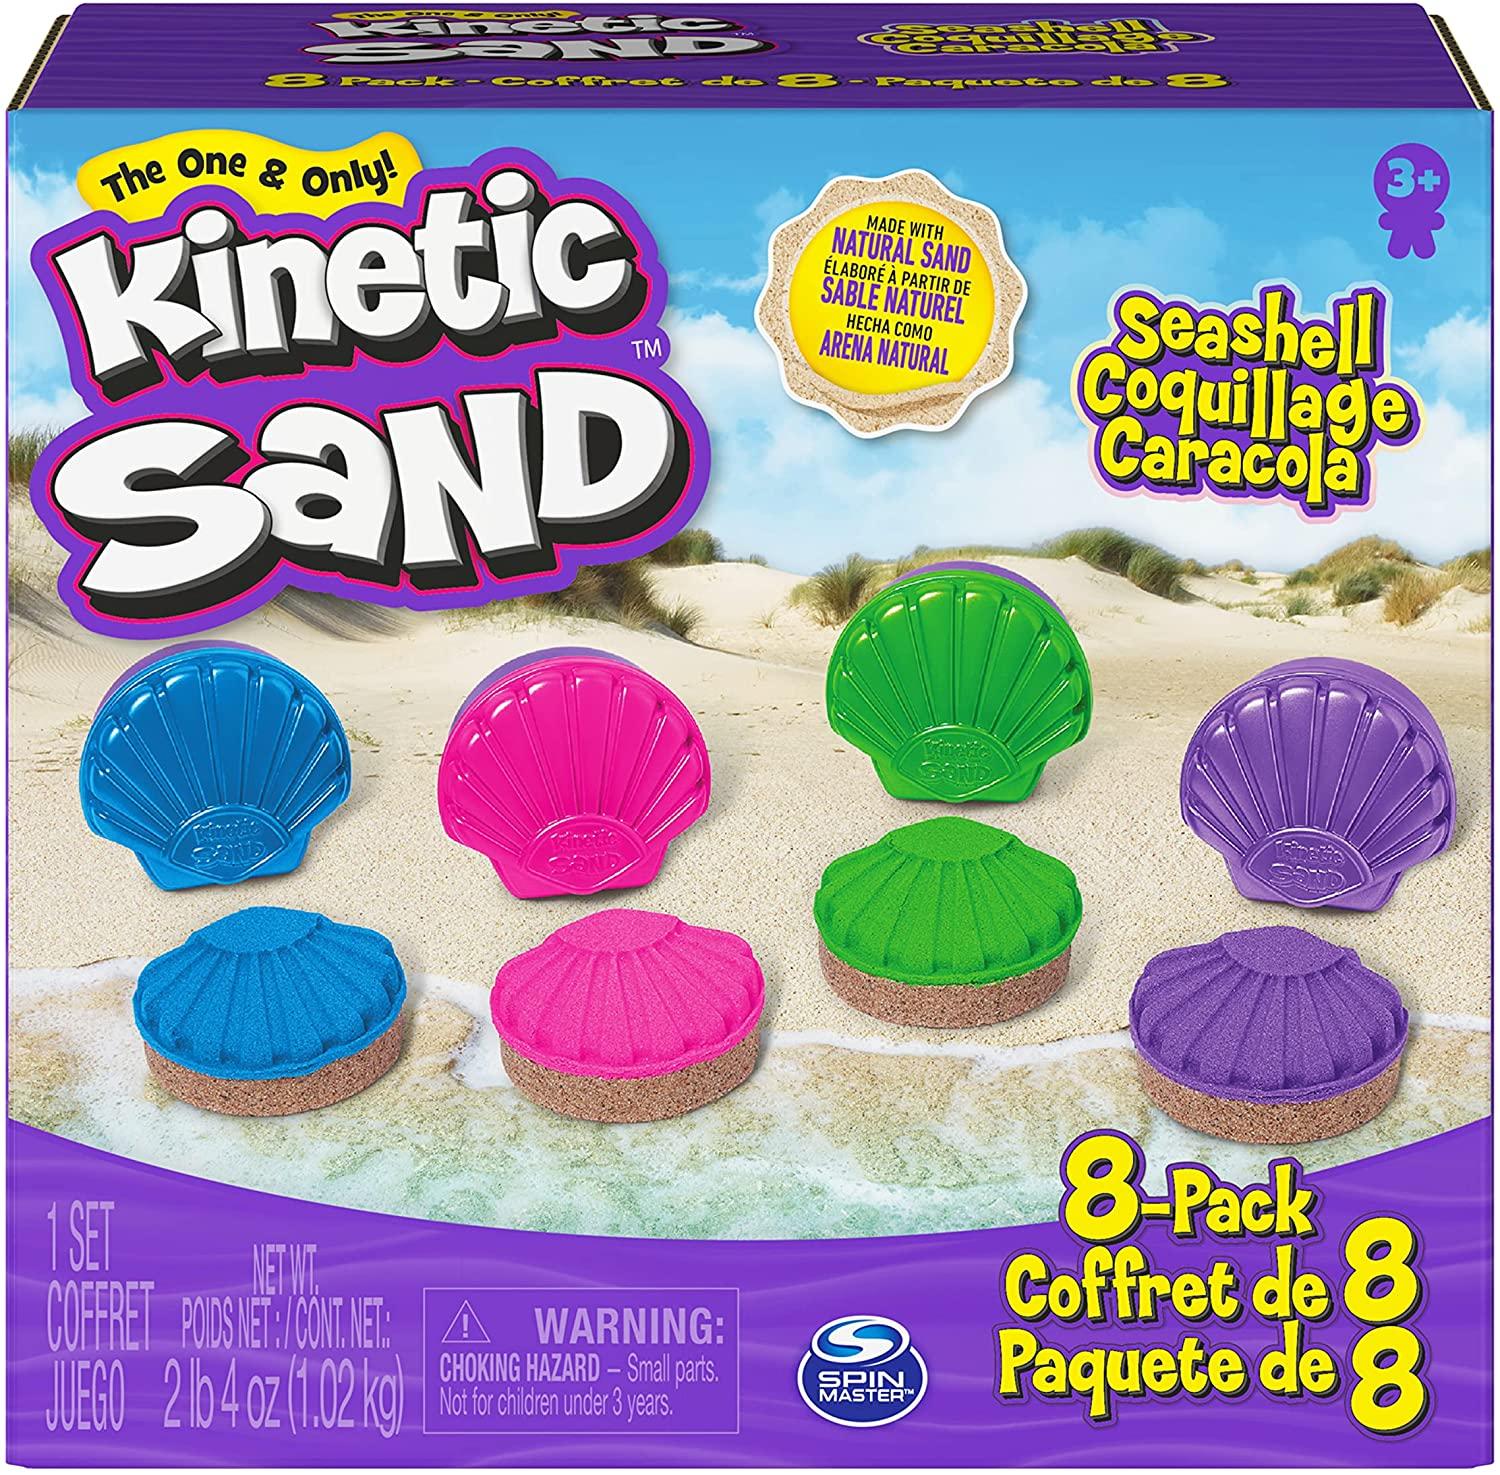 8-Pack Kinetic Sand Seashell Container Molds for $11.99